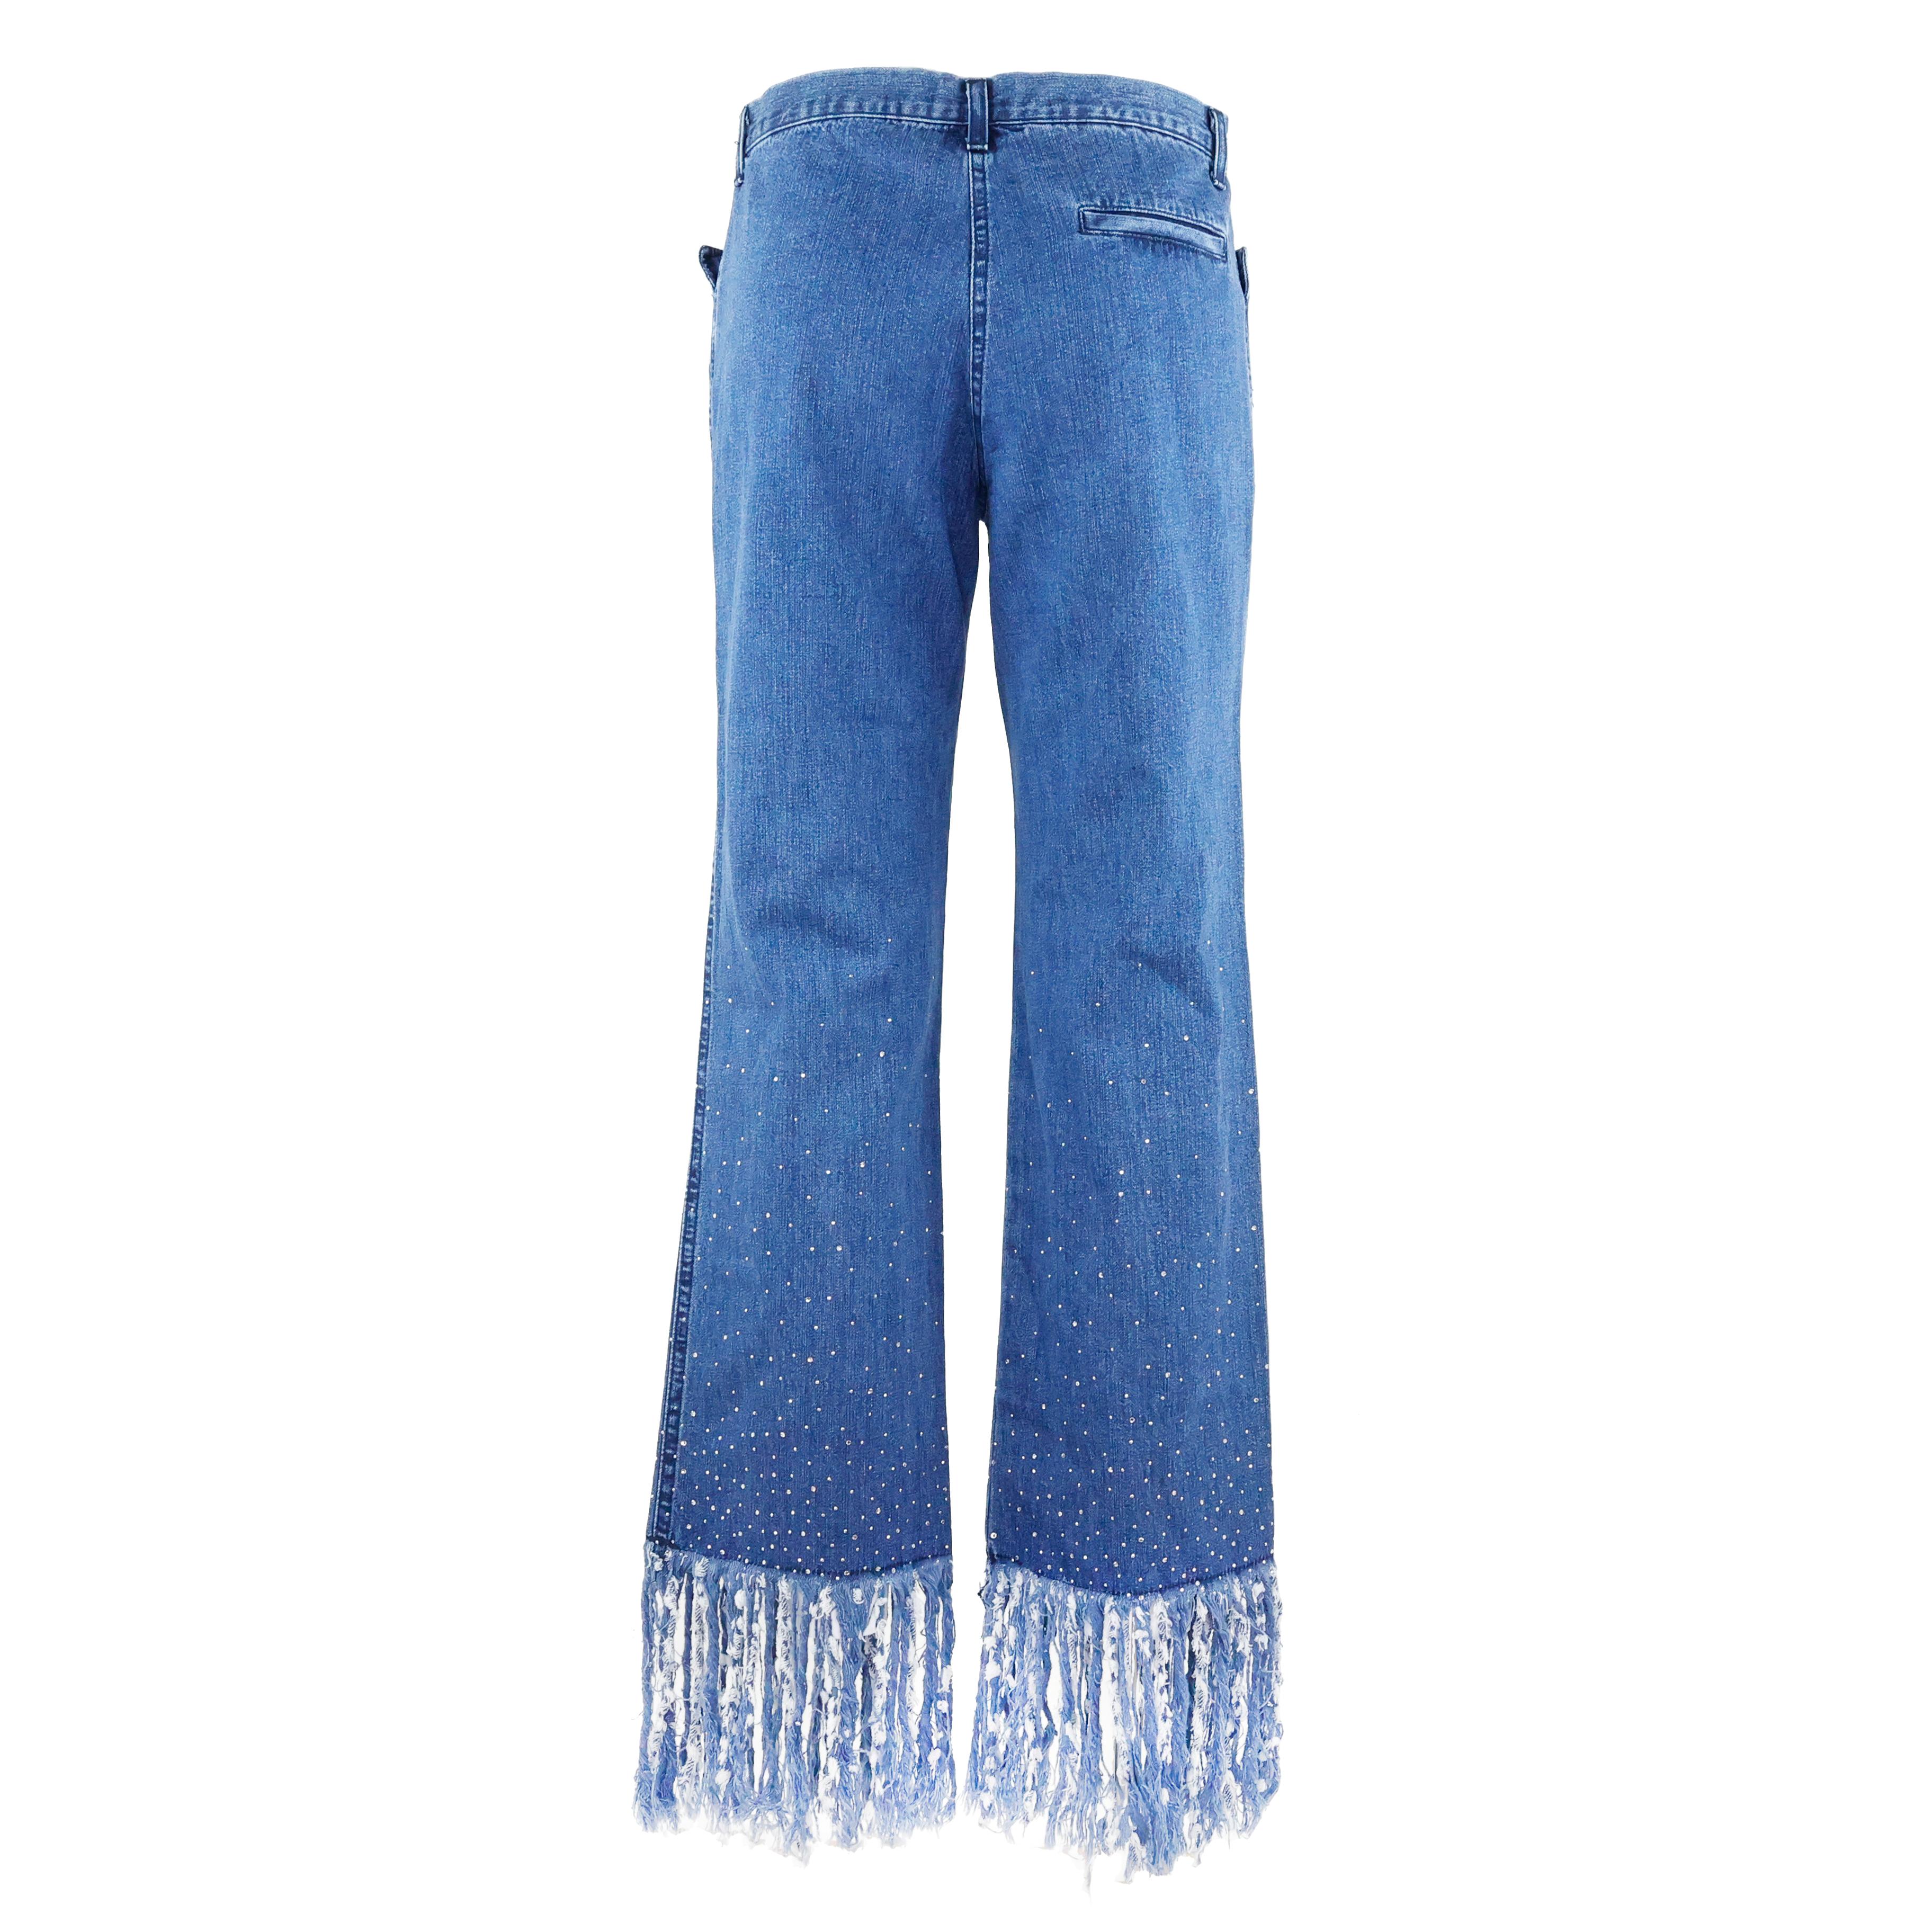 Fendi flared fringed jeans, in blue denim, with crystals on the flared and on the fringes, please note: crystals are more shiny in person than in pictures (really really beautiful piece). Size 44 IT.

Condition:
Excellent.
